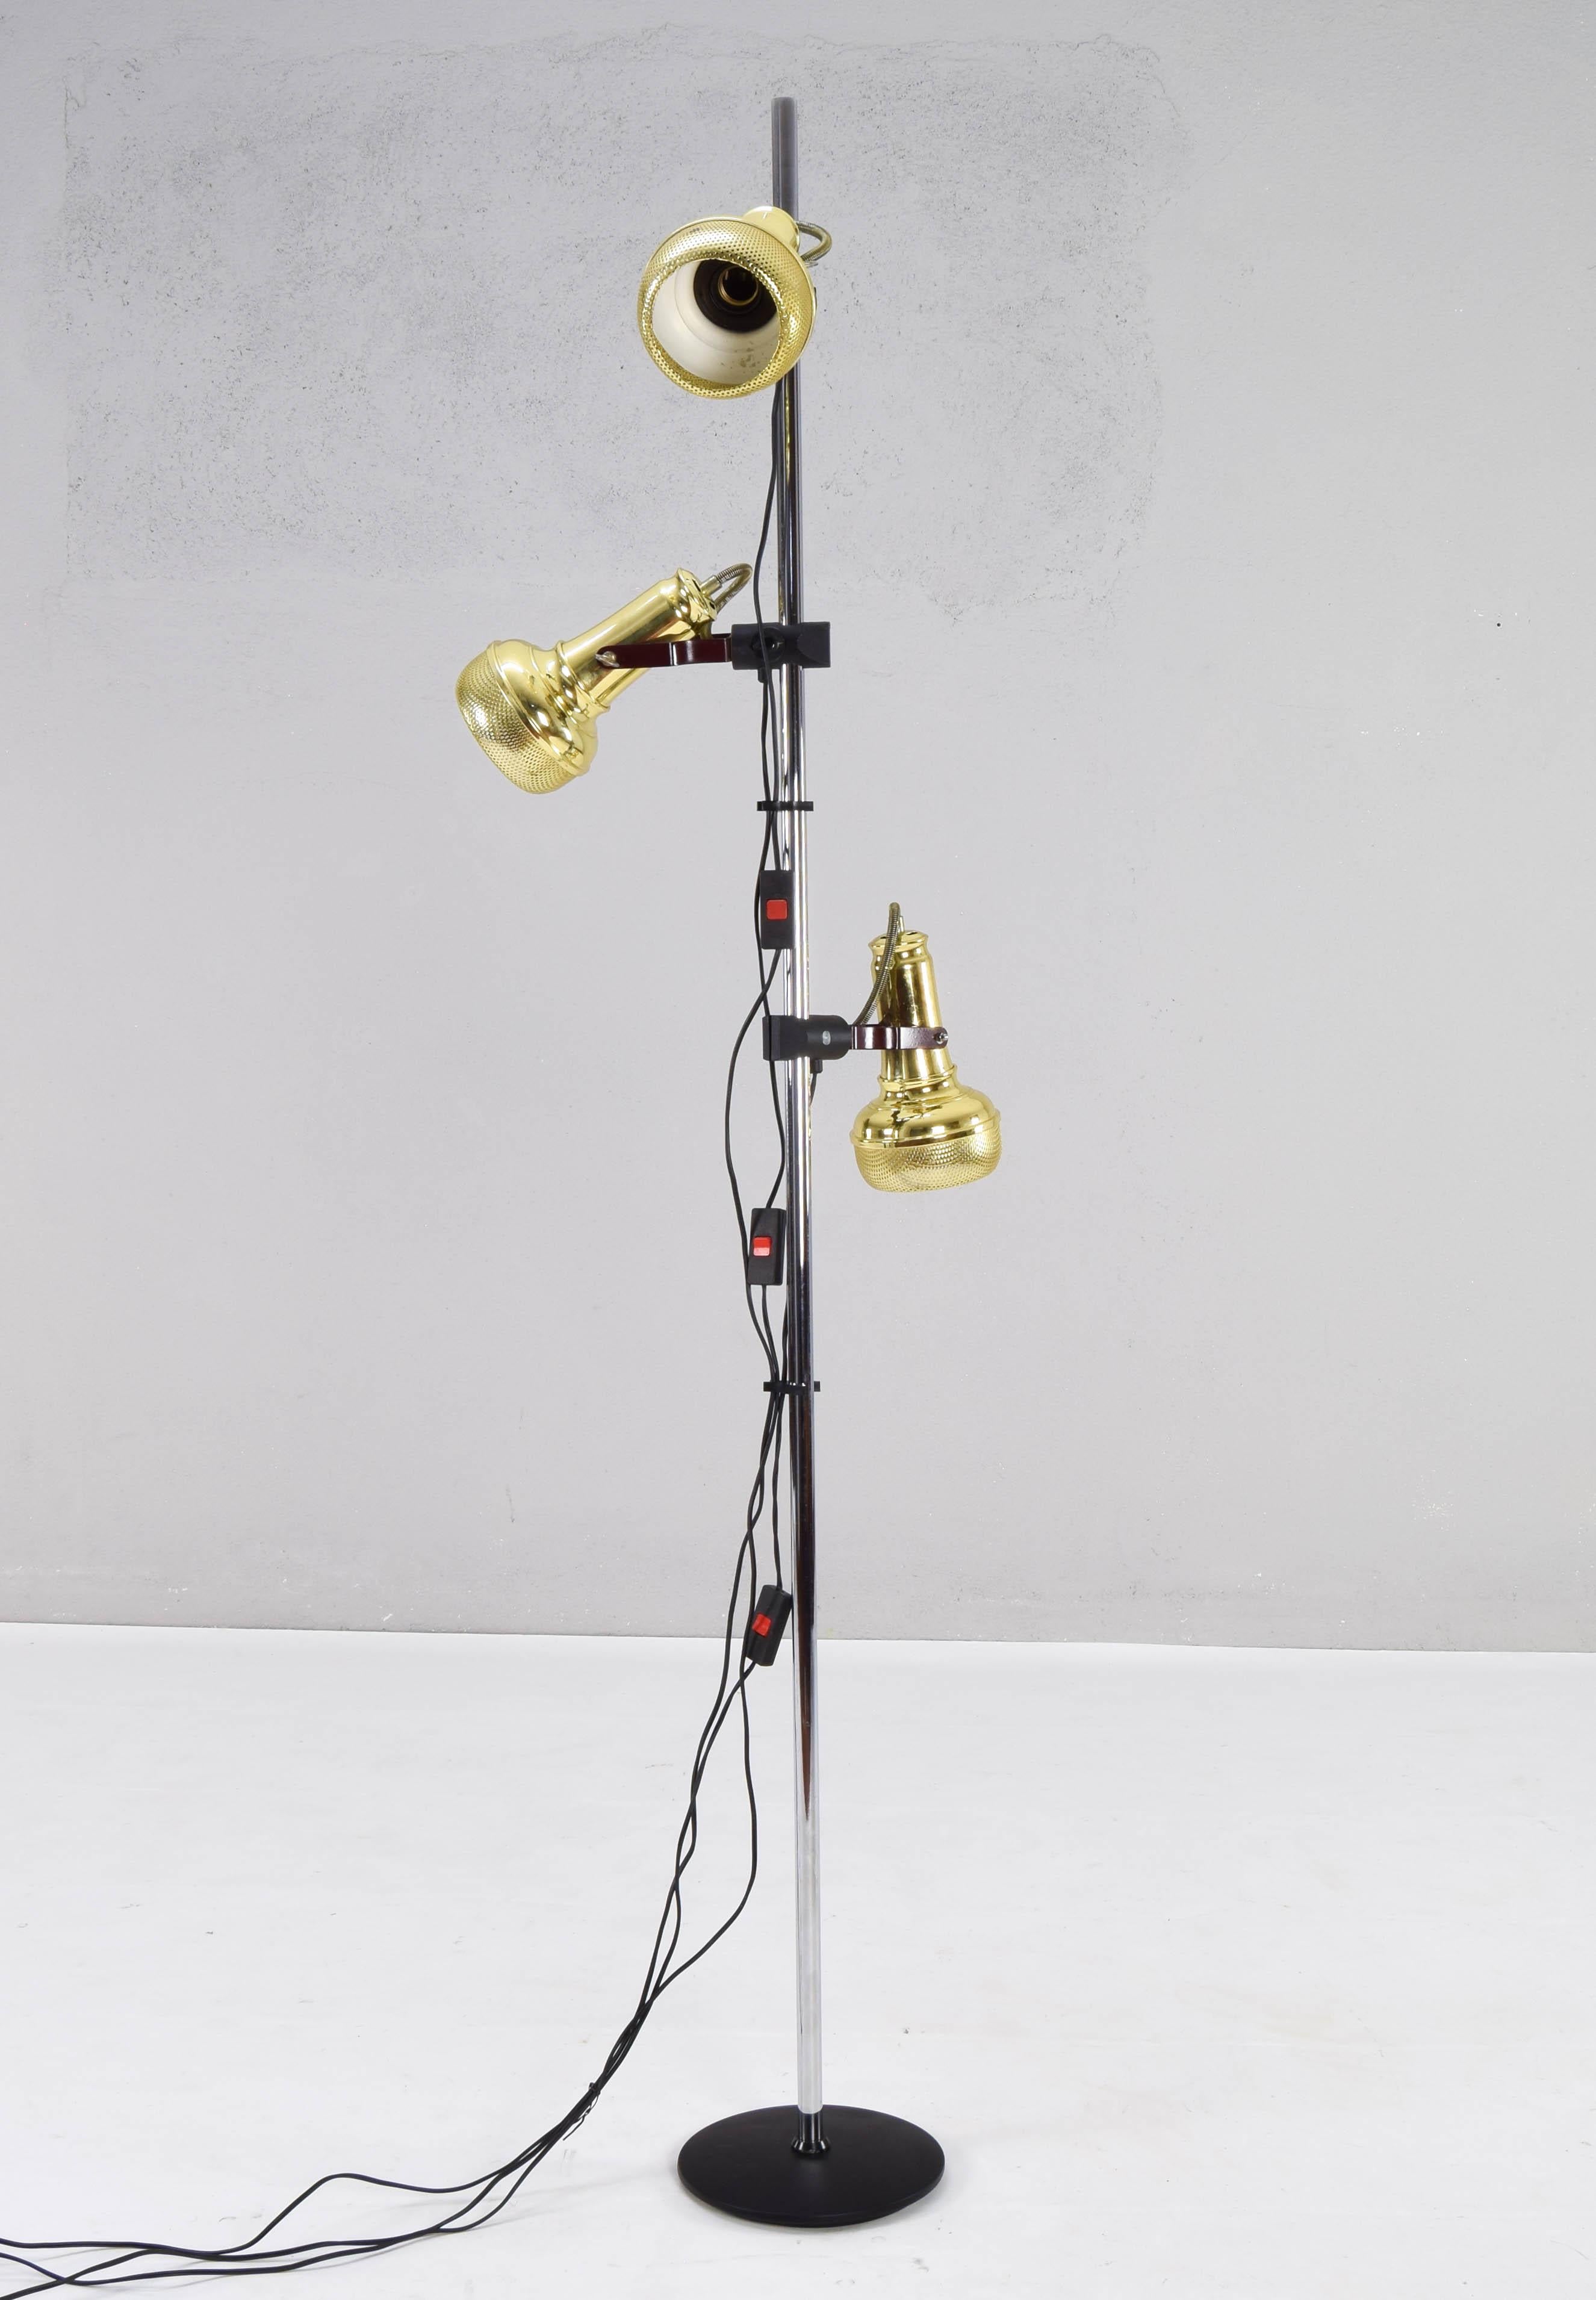 FASE Microphones Brass Mid-Century Modern Floor Lamp, Spain 70s In Good Condition For Sale In Escalona, Toledo